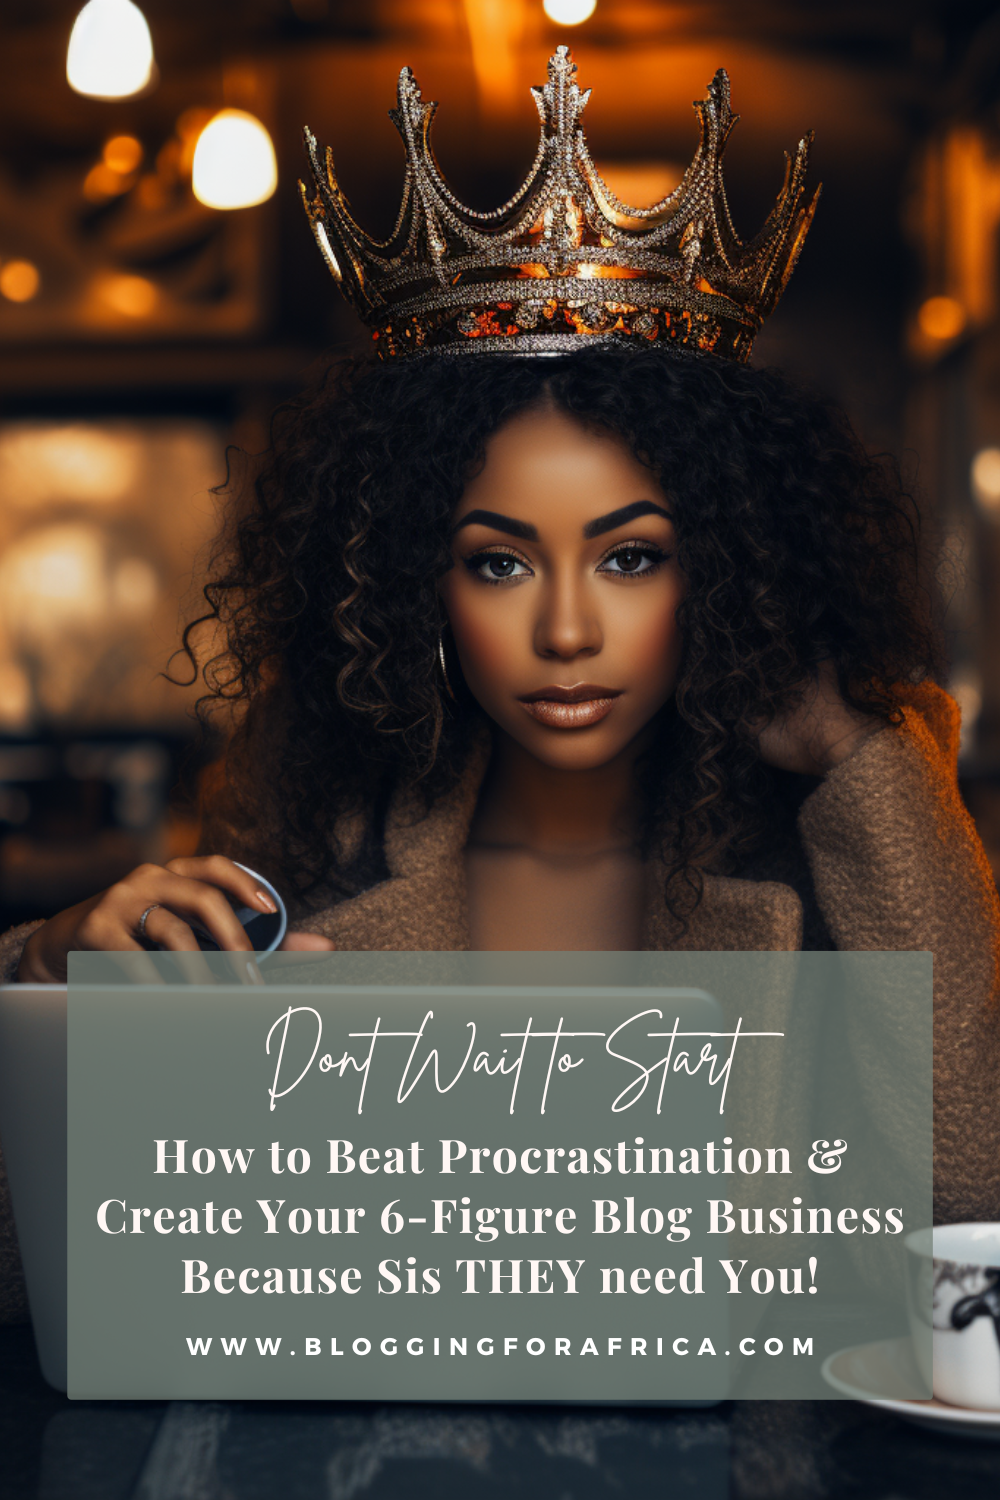 Overcome procrastination and create your 6-figure blogging business because sis they need you!